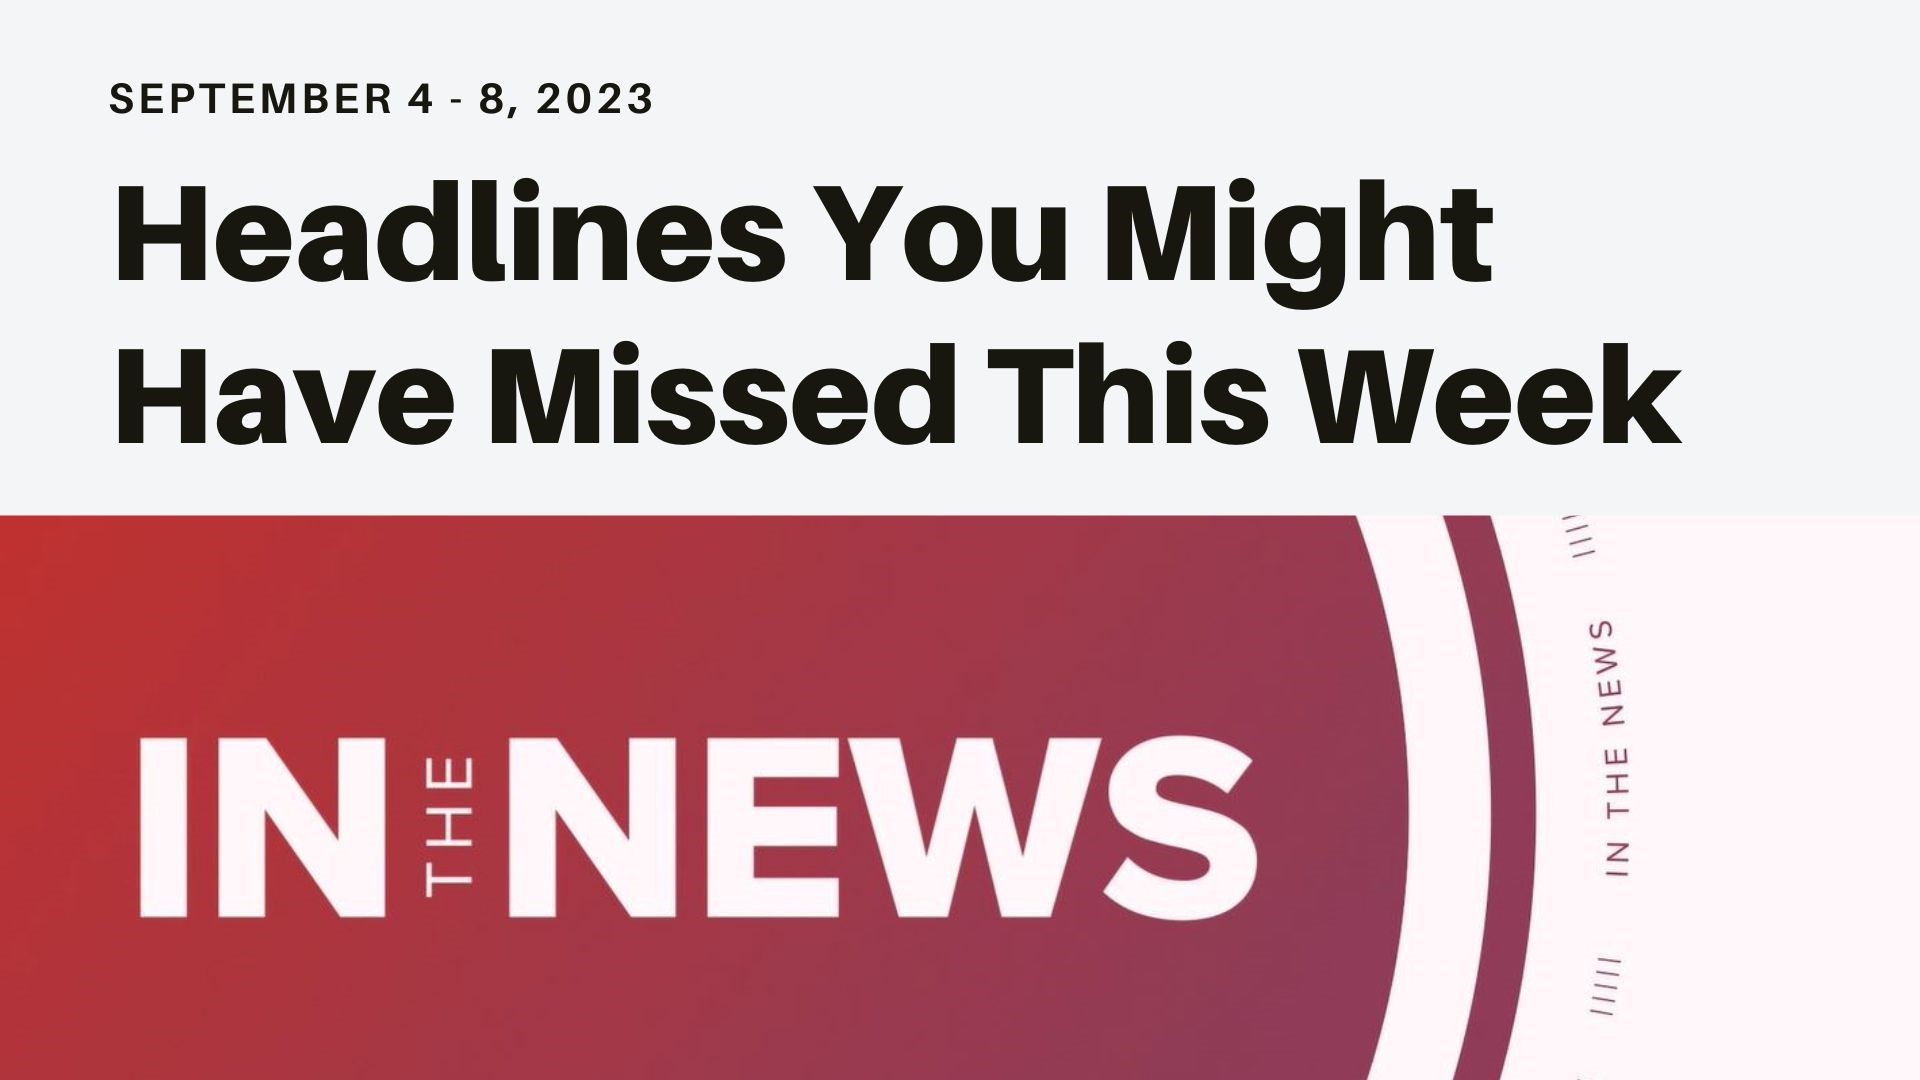 A look at some of the top headlines from the week including states trying to remove Trump from ballots to an update on a new covid-19 subvariant and the flu.